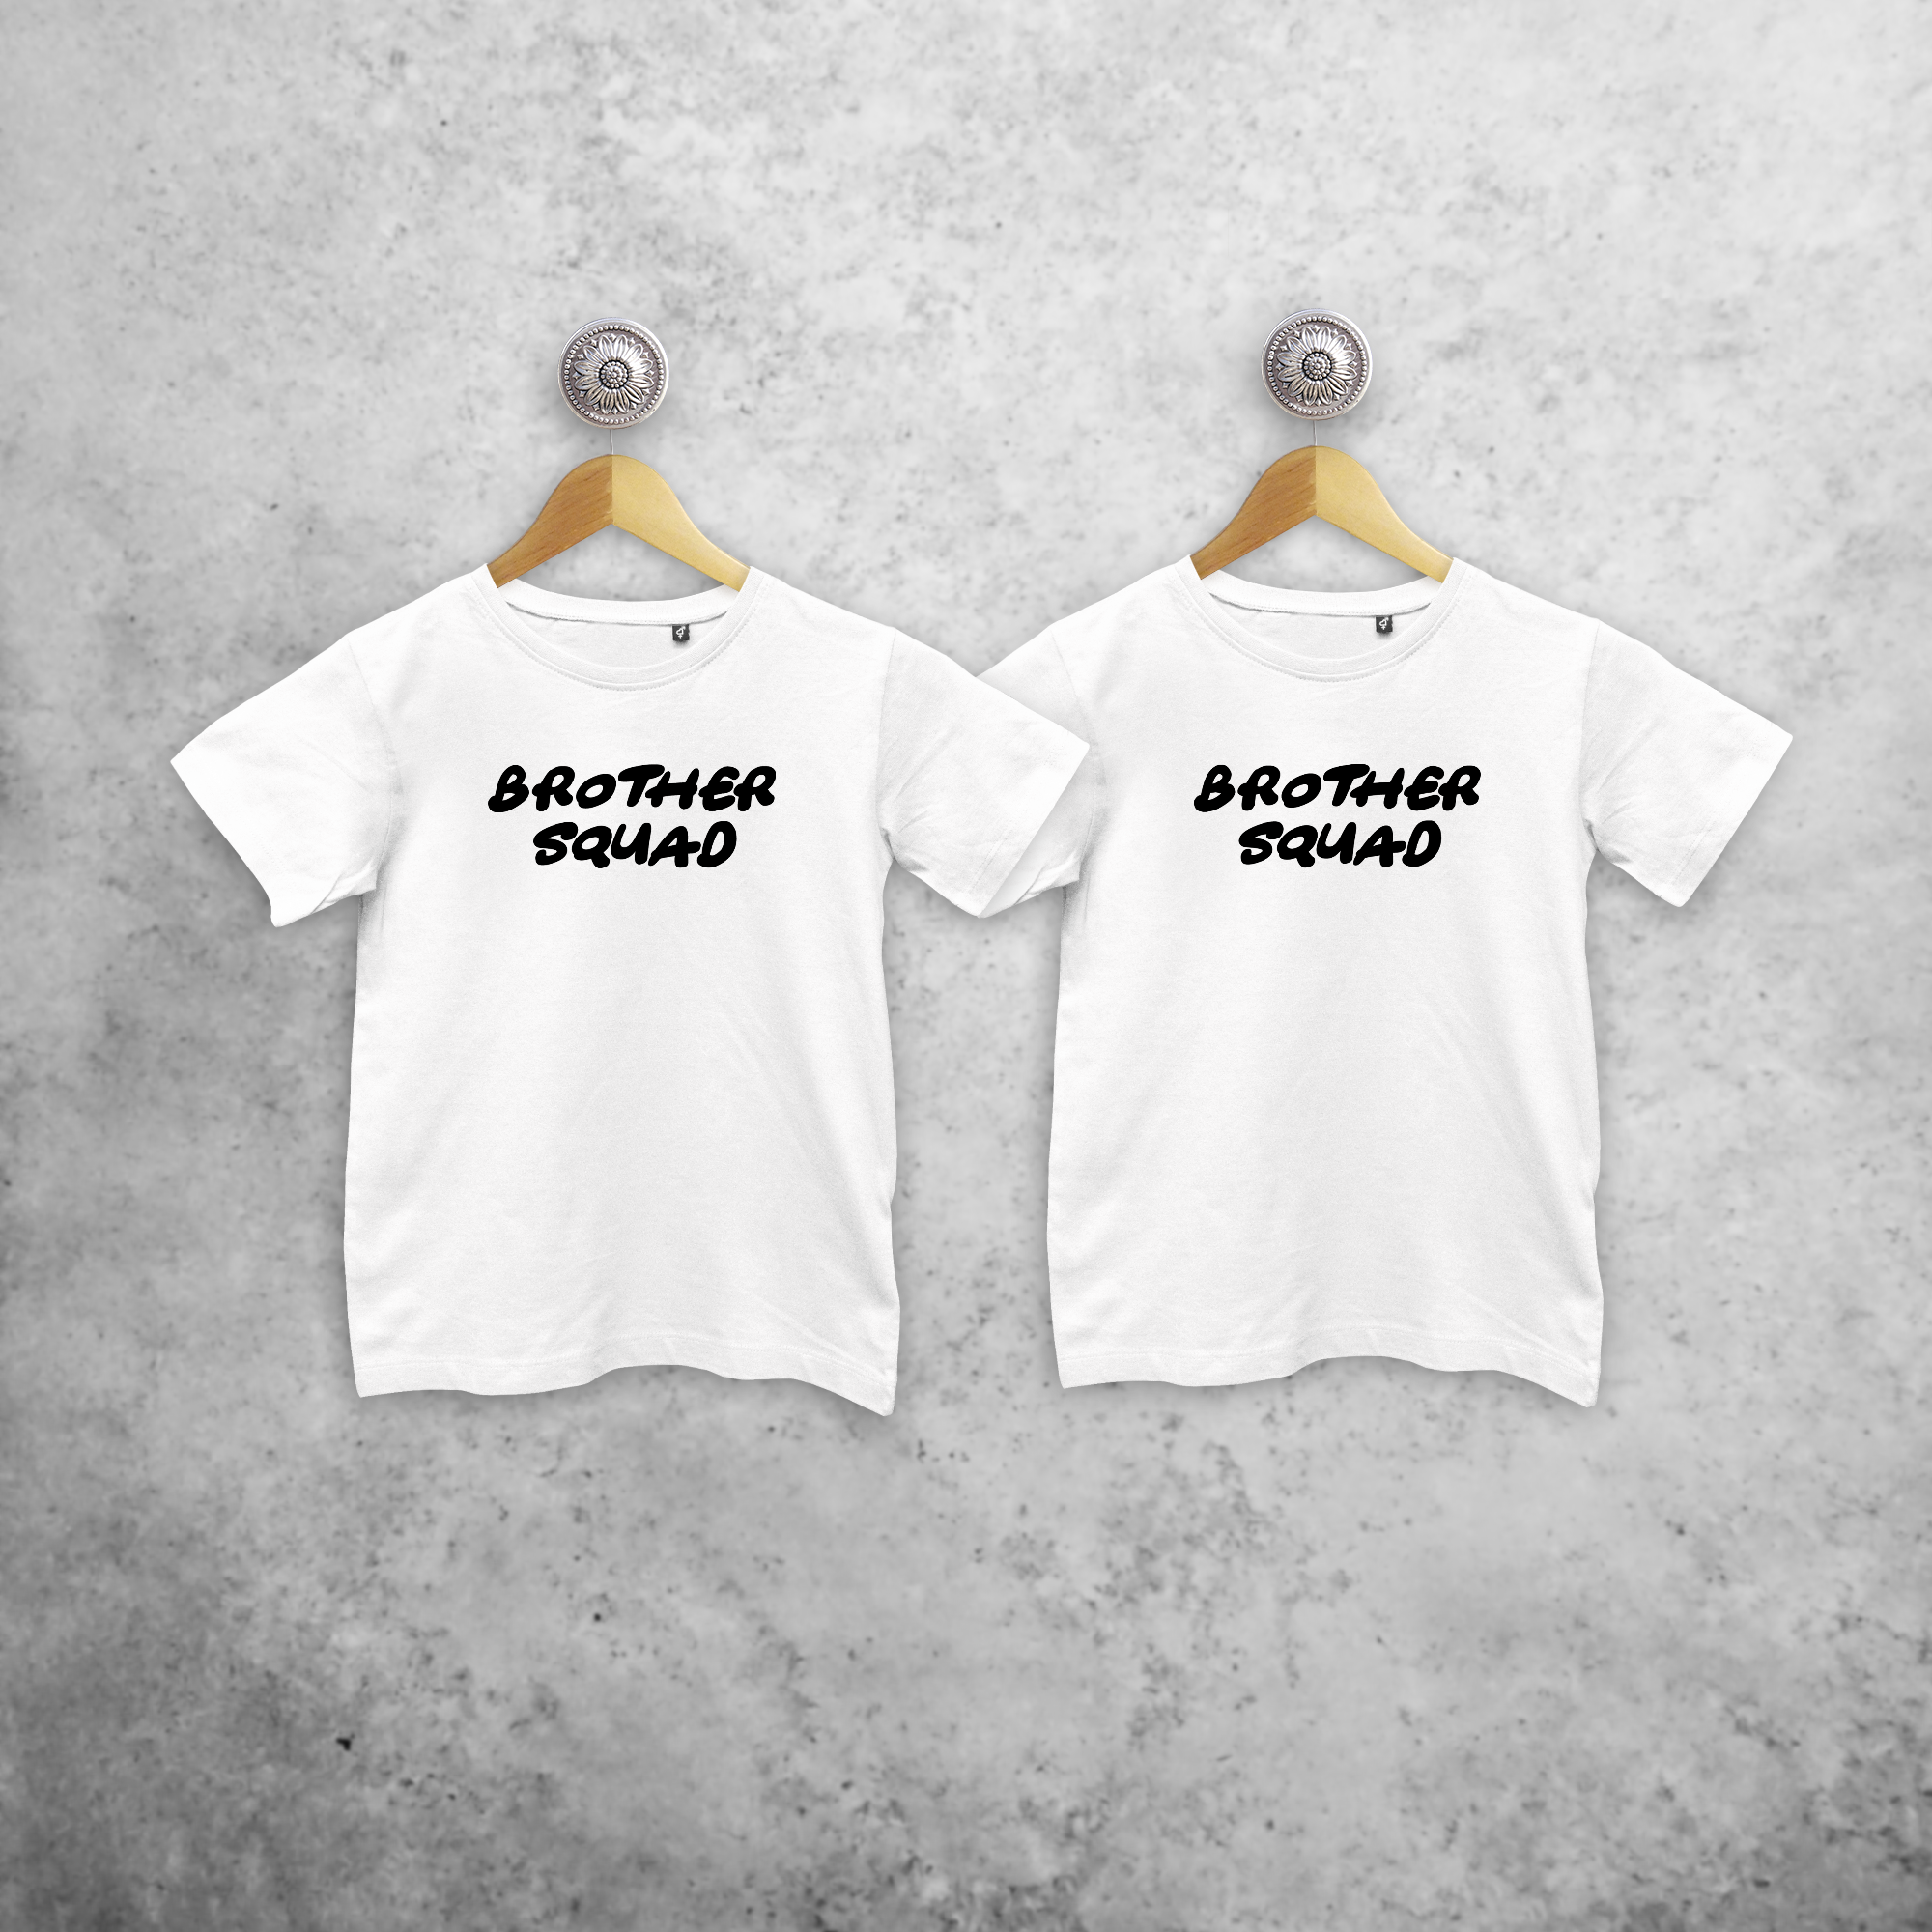 'Brother squad' kids sibling shirts